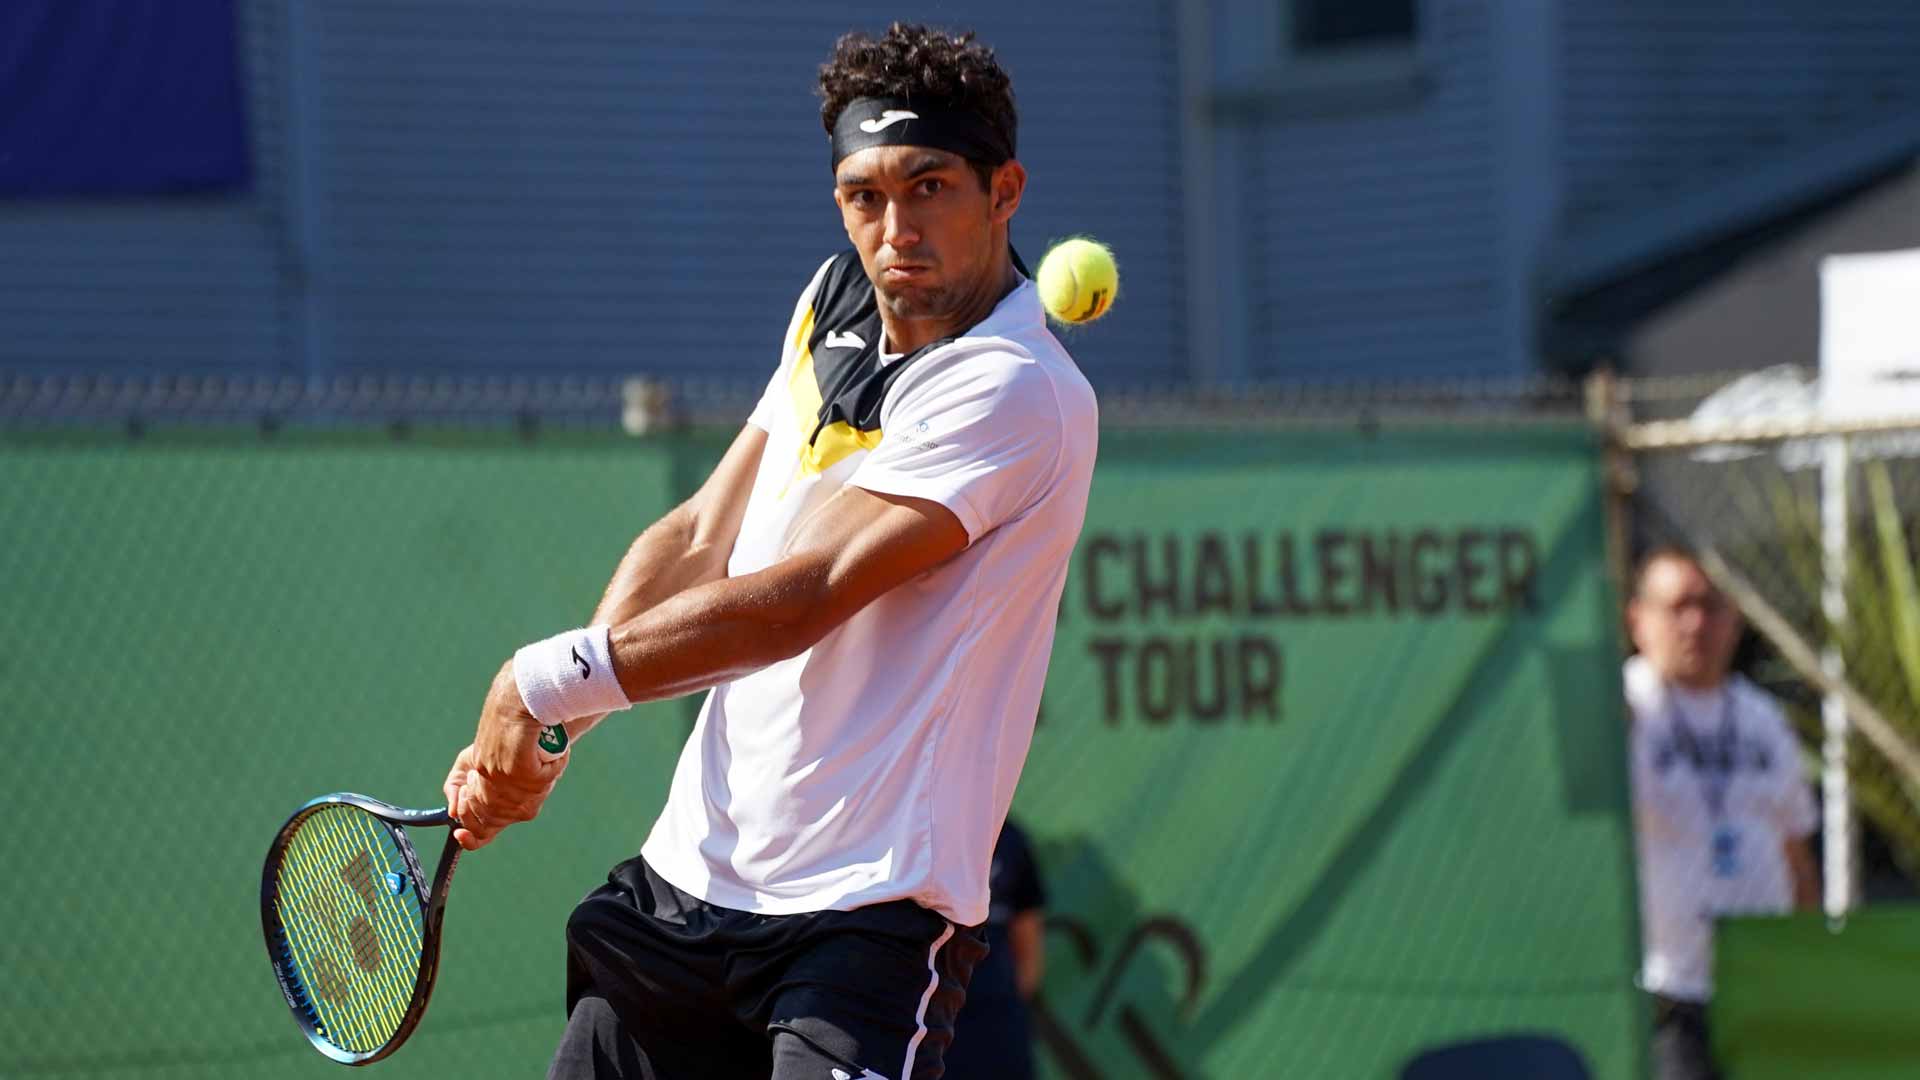 Rincon, former US Open boys champ, wins first Challenger title